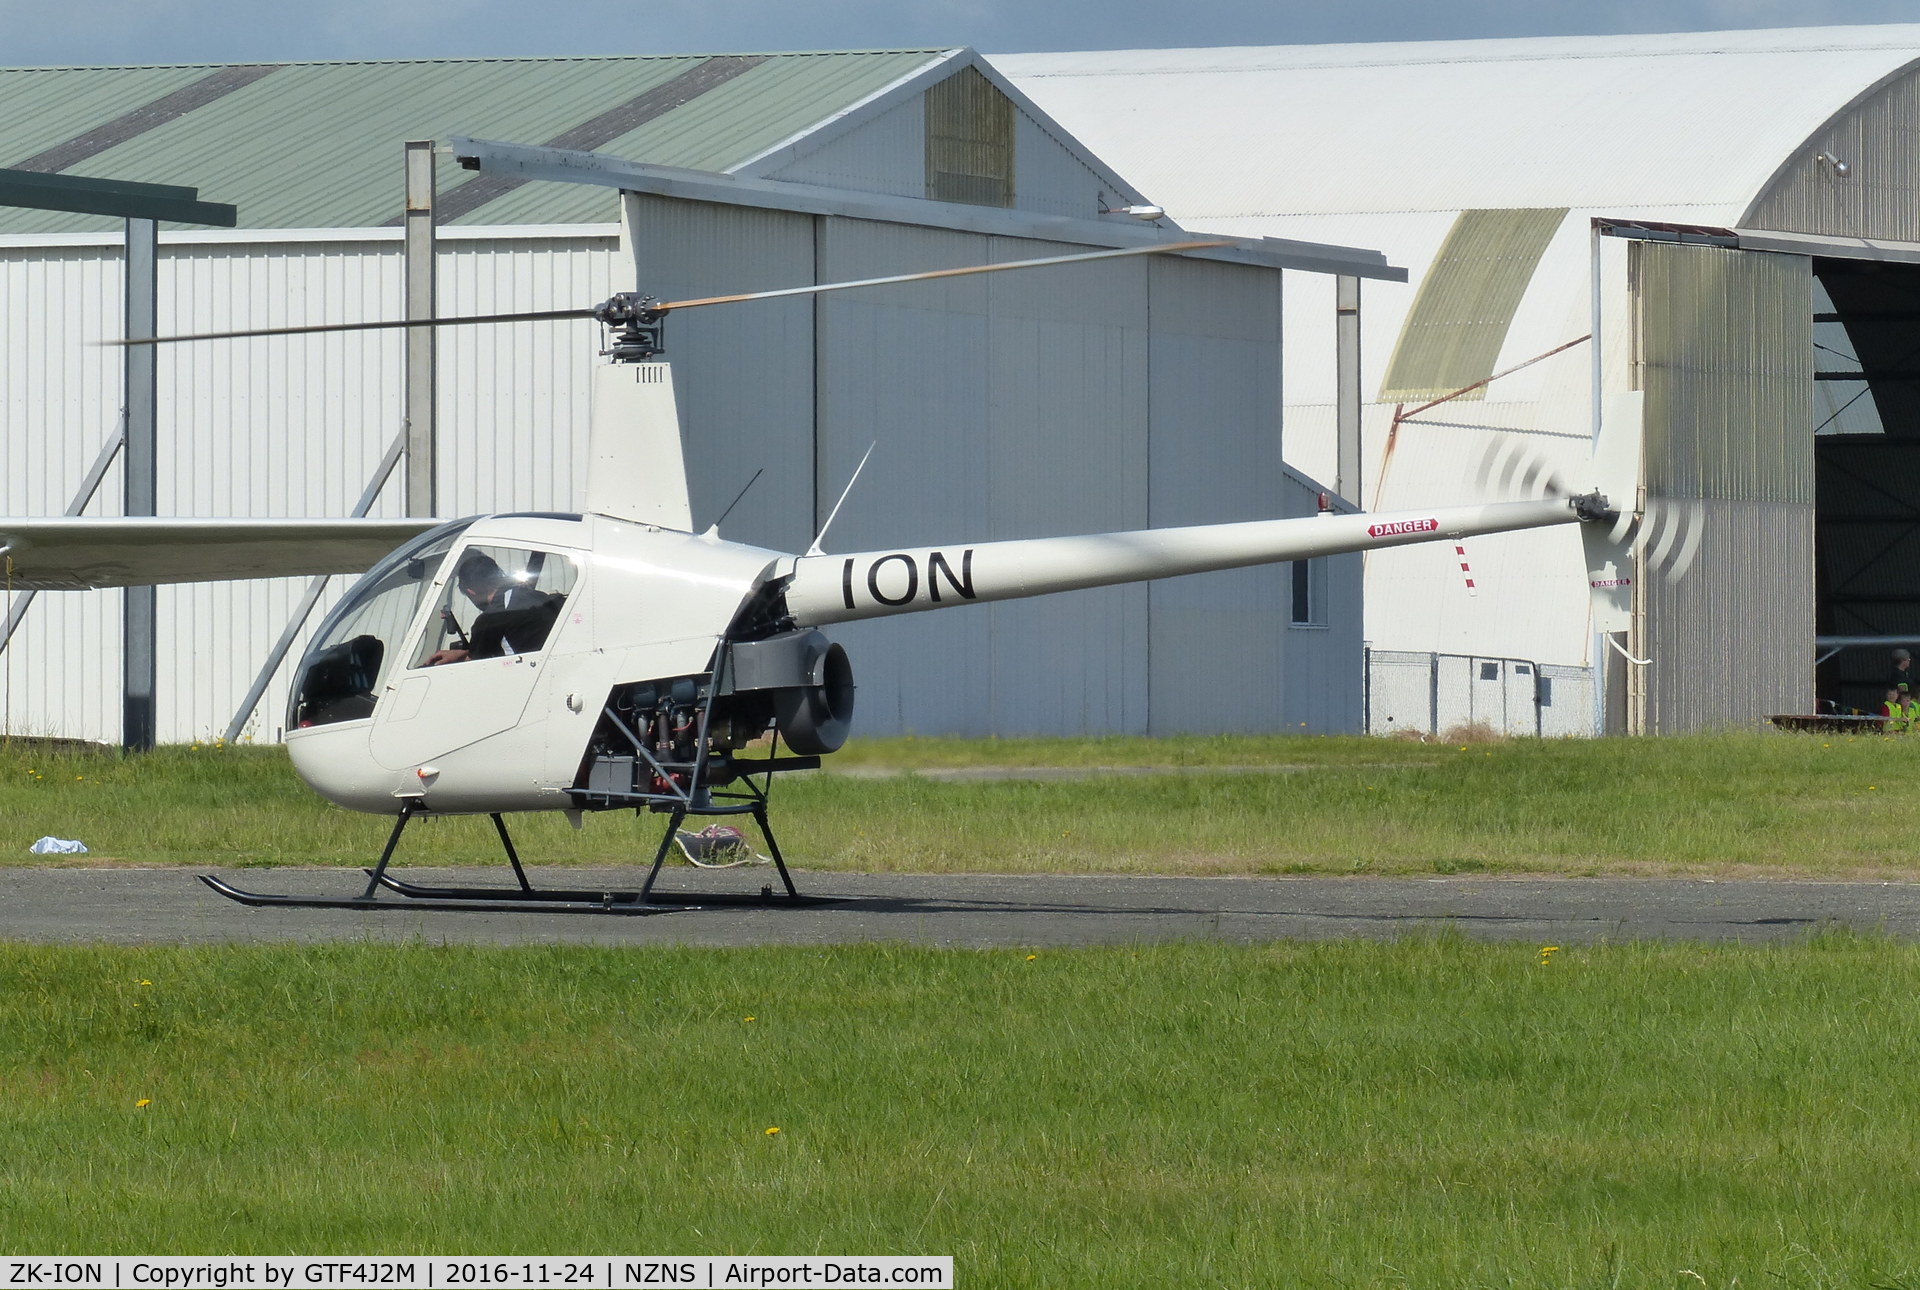 ZK-ION, 2007 Robinson R22 Beta C/N 4111, ZK-ION at Nelson 24.11.16